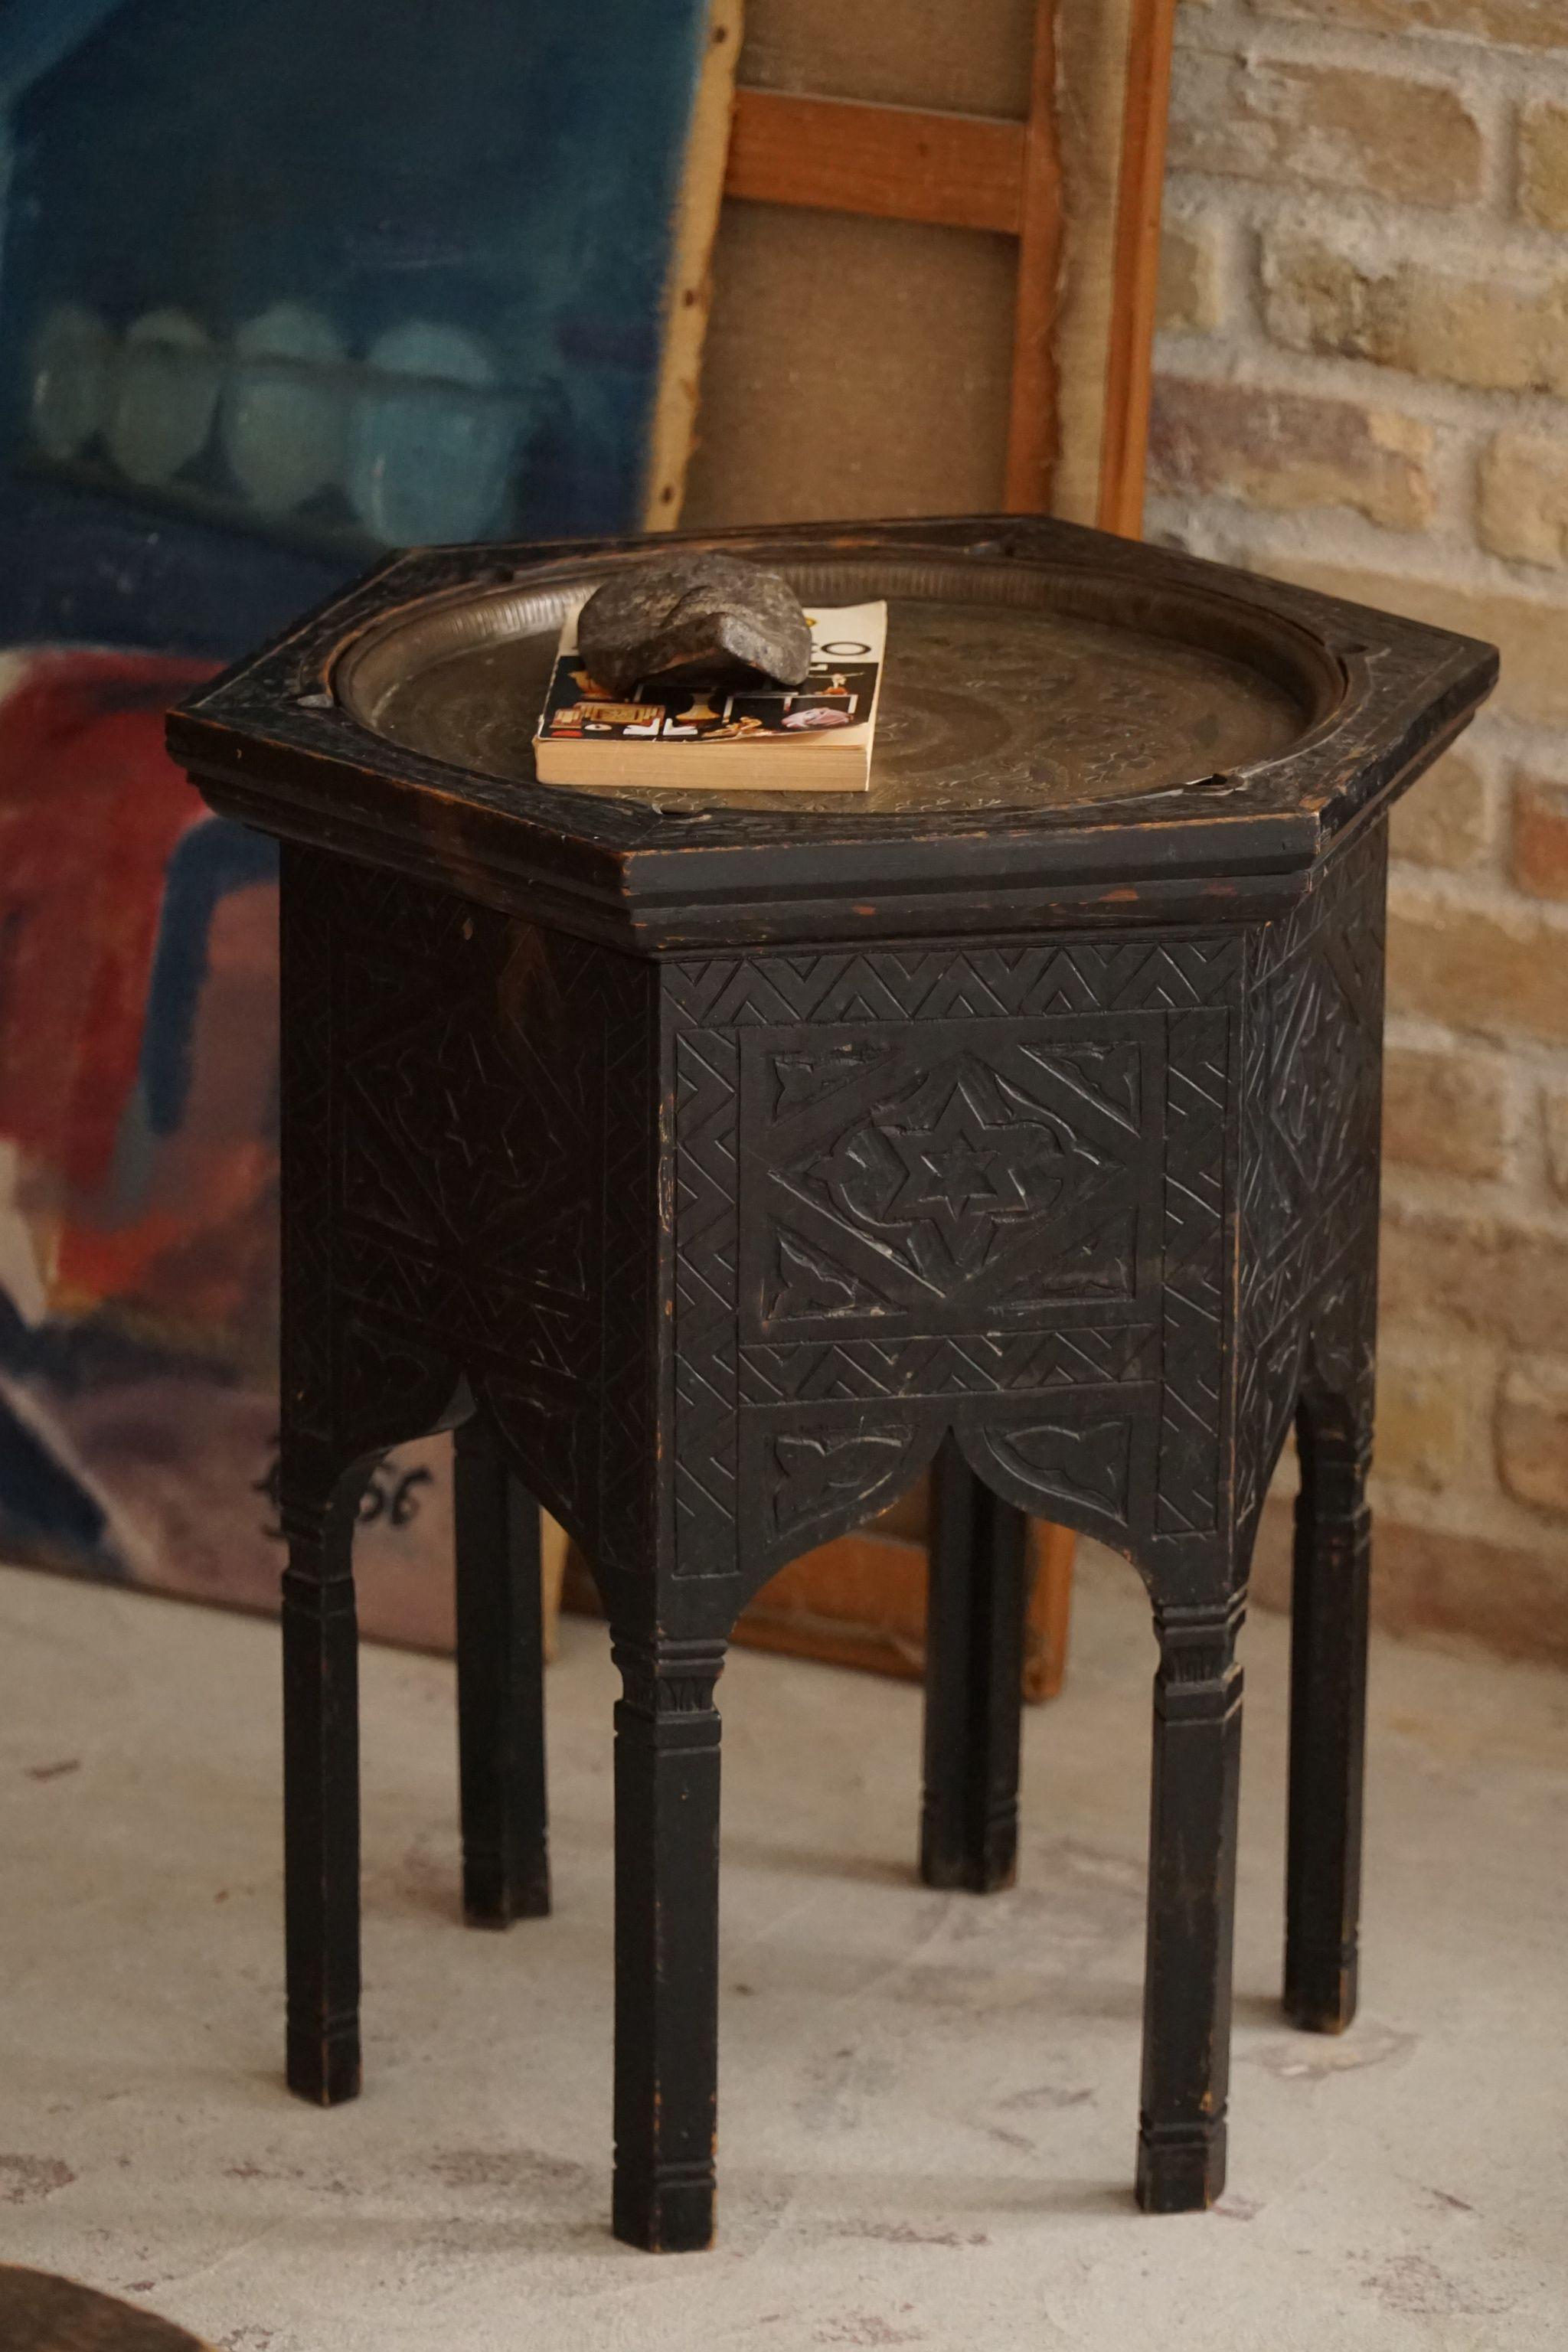 A decorative hexagon shaped side table with 6 legs. Made in the countryside by an unknown cabinetmaker in India. Made in the late 19th century. A cute vintage wabi sabi item, well suited for the modern interior.

